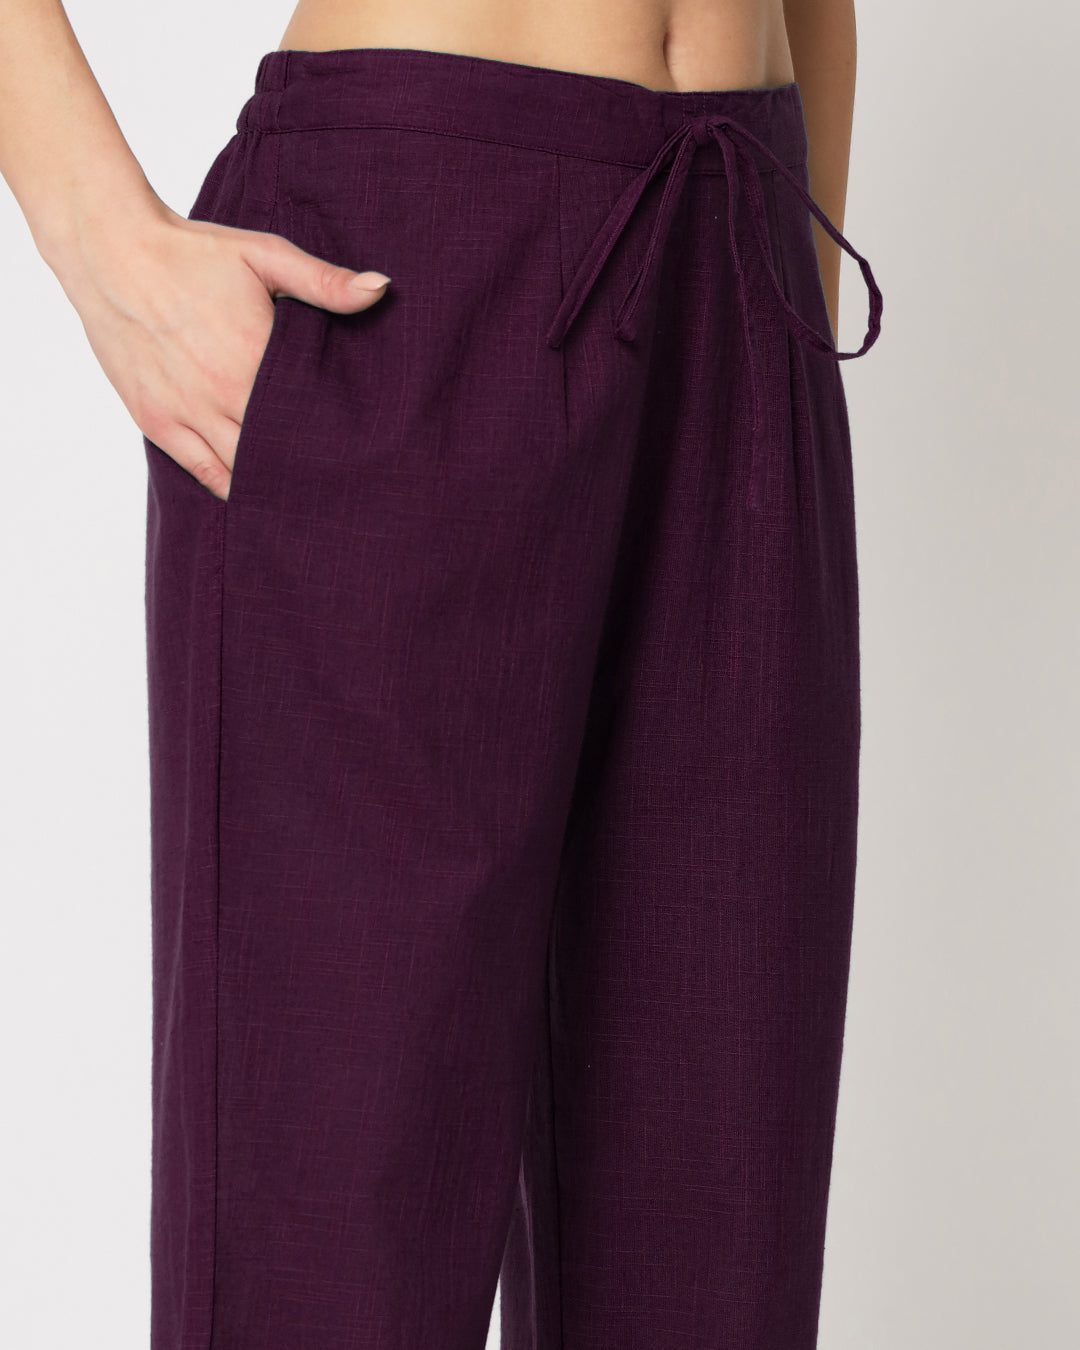 Plum Passion Collar Neck Mid Length Solid Co-ord Set